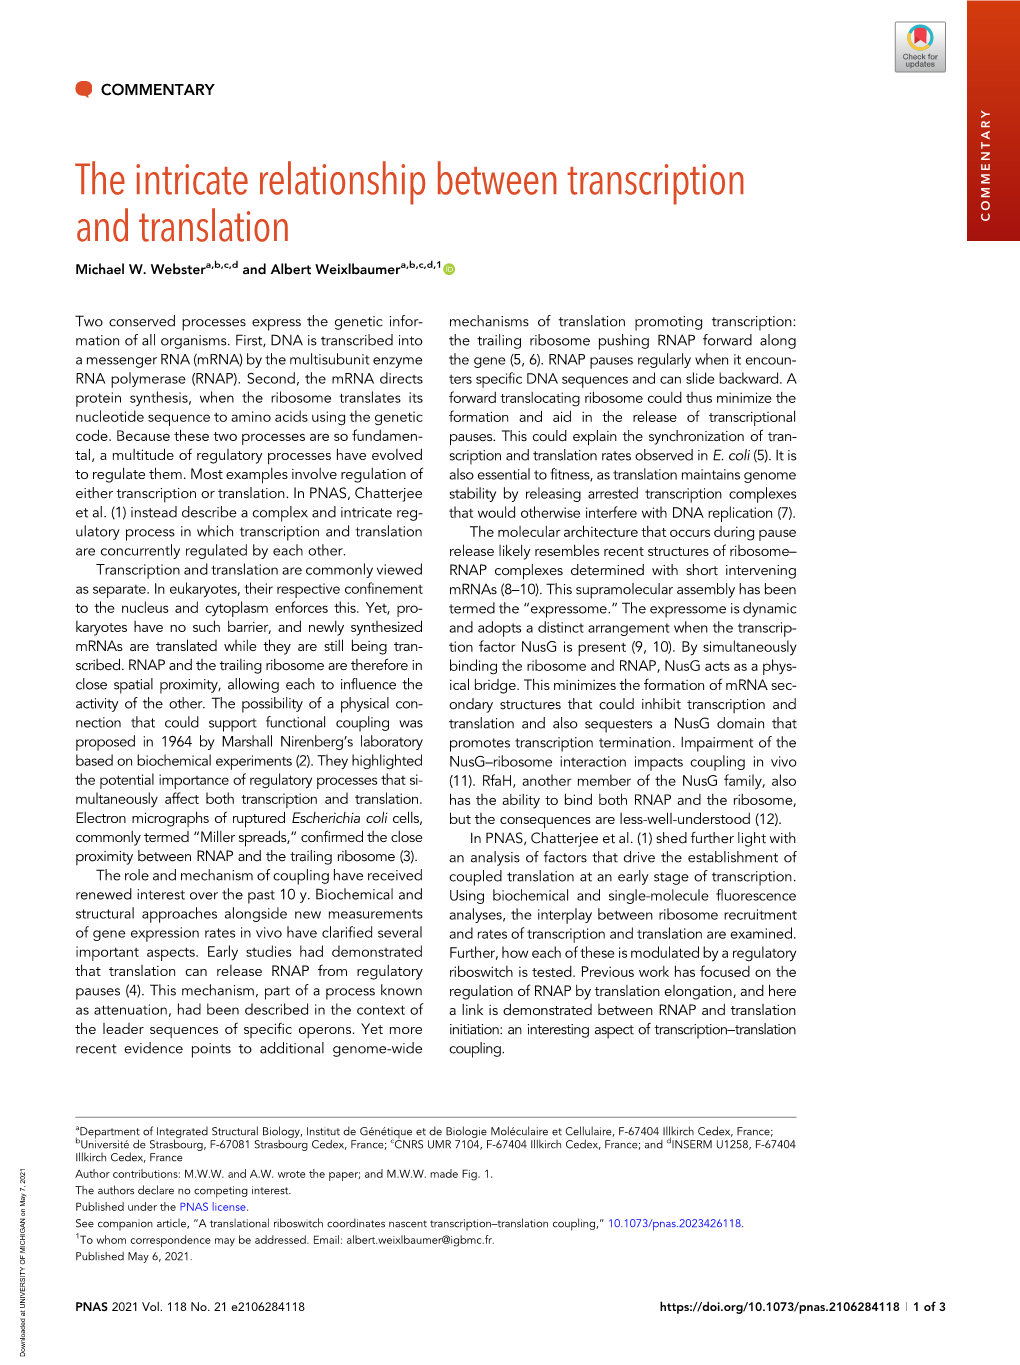 The Intricate Relationship Between Transcription and Translation Downloaded at UNIVERSITY of MICHIGAN on May 7, 2021 3 O